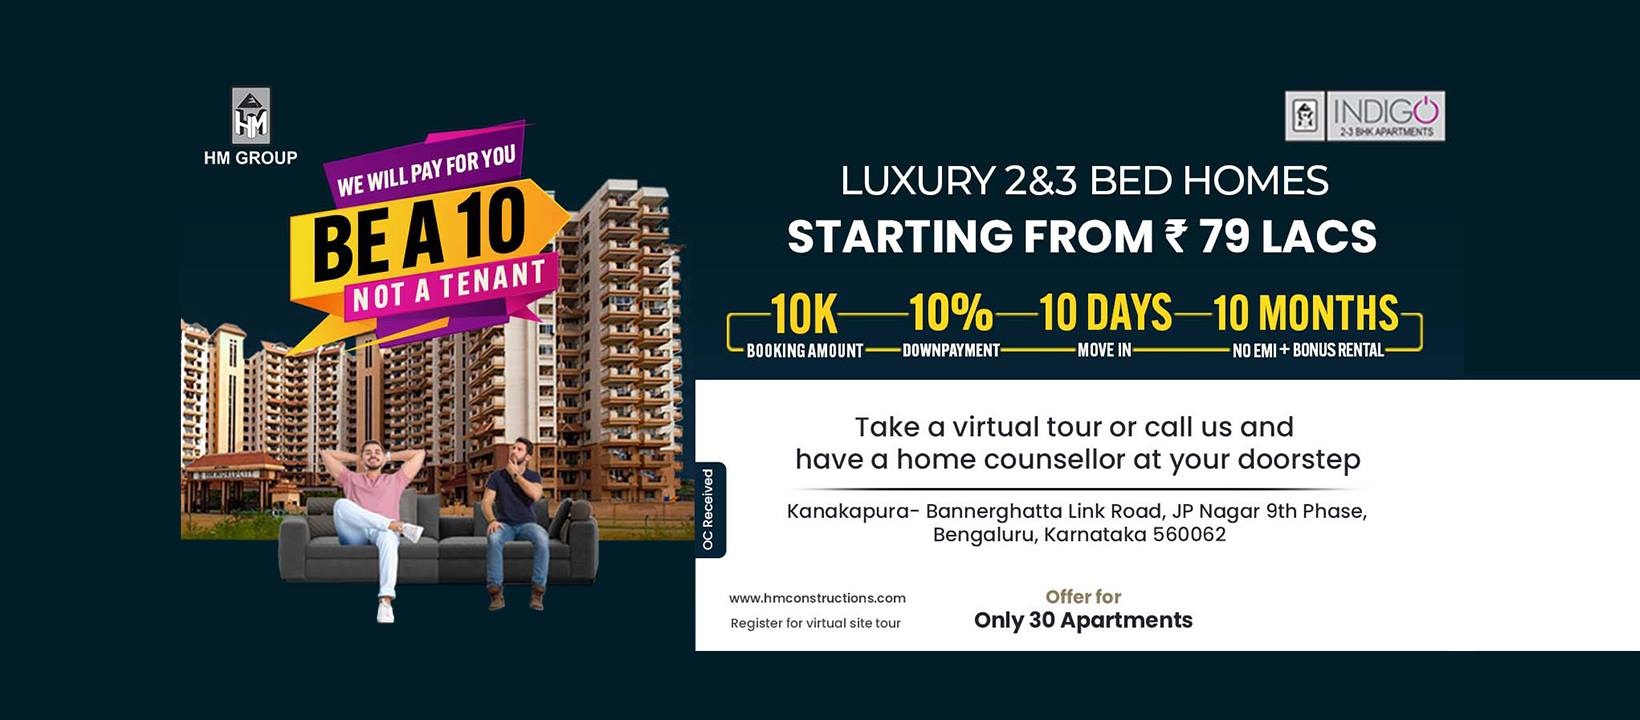 Luxurious 2 and 3 BHK home Starting Rs 79 Lac at HM Indigo, Bangalore Update